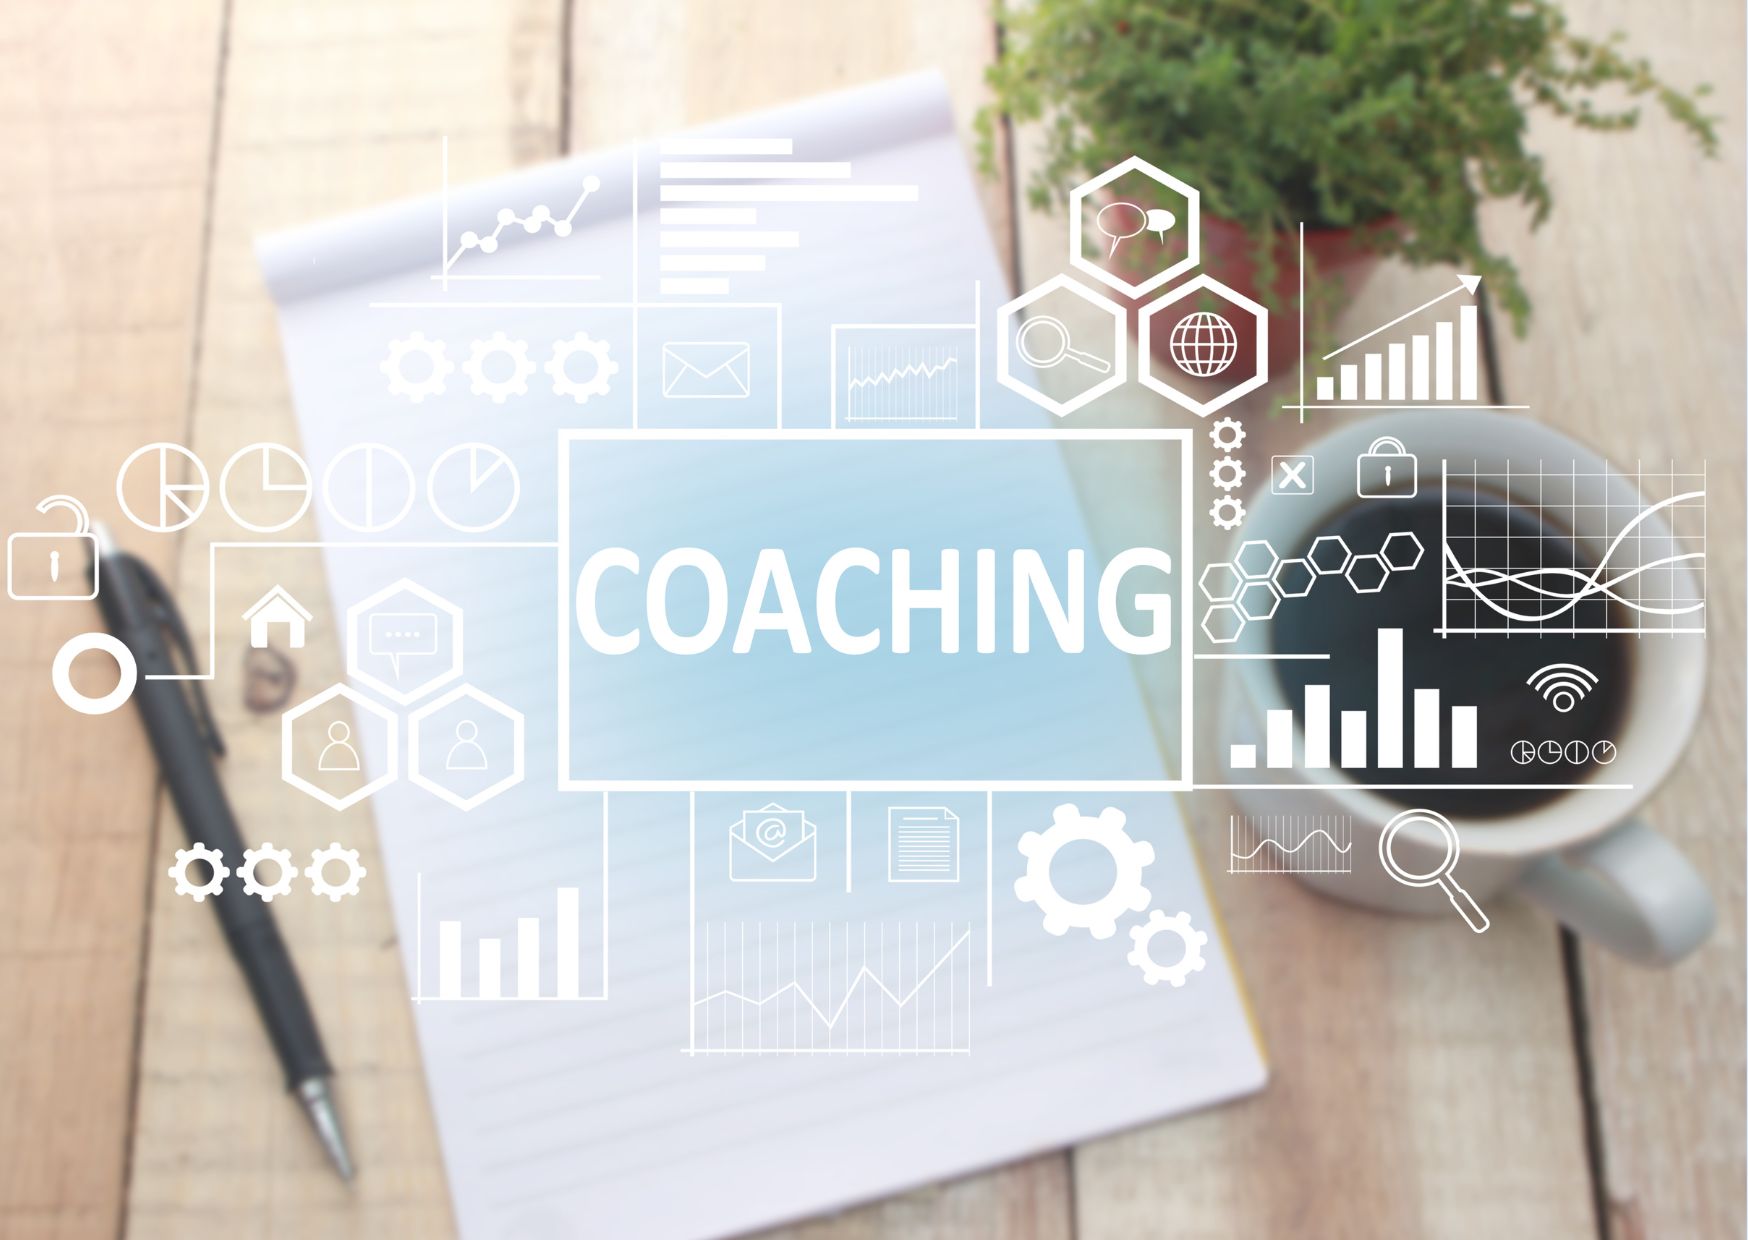 You are currently viewing What are the top most common coaching topics?